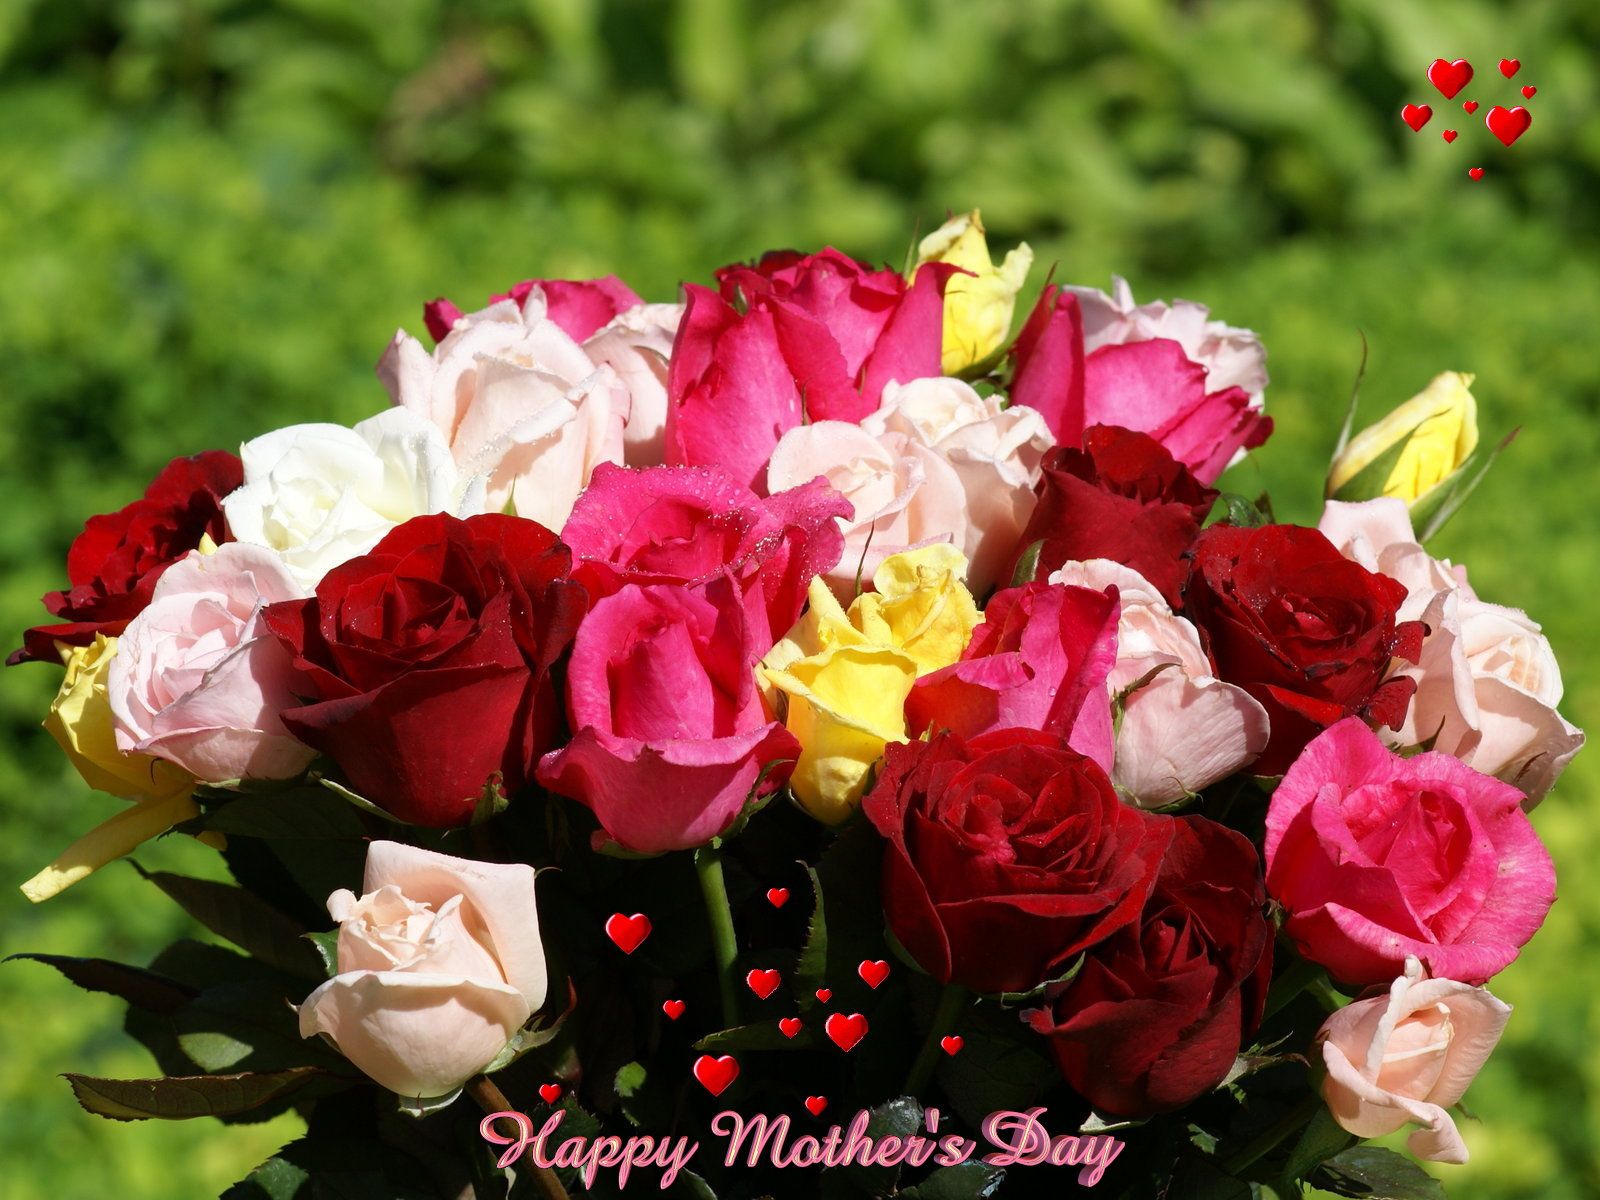 Mothers Day wallpaper beautiful flowers